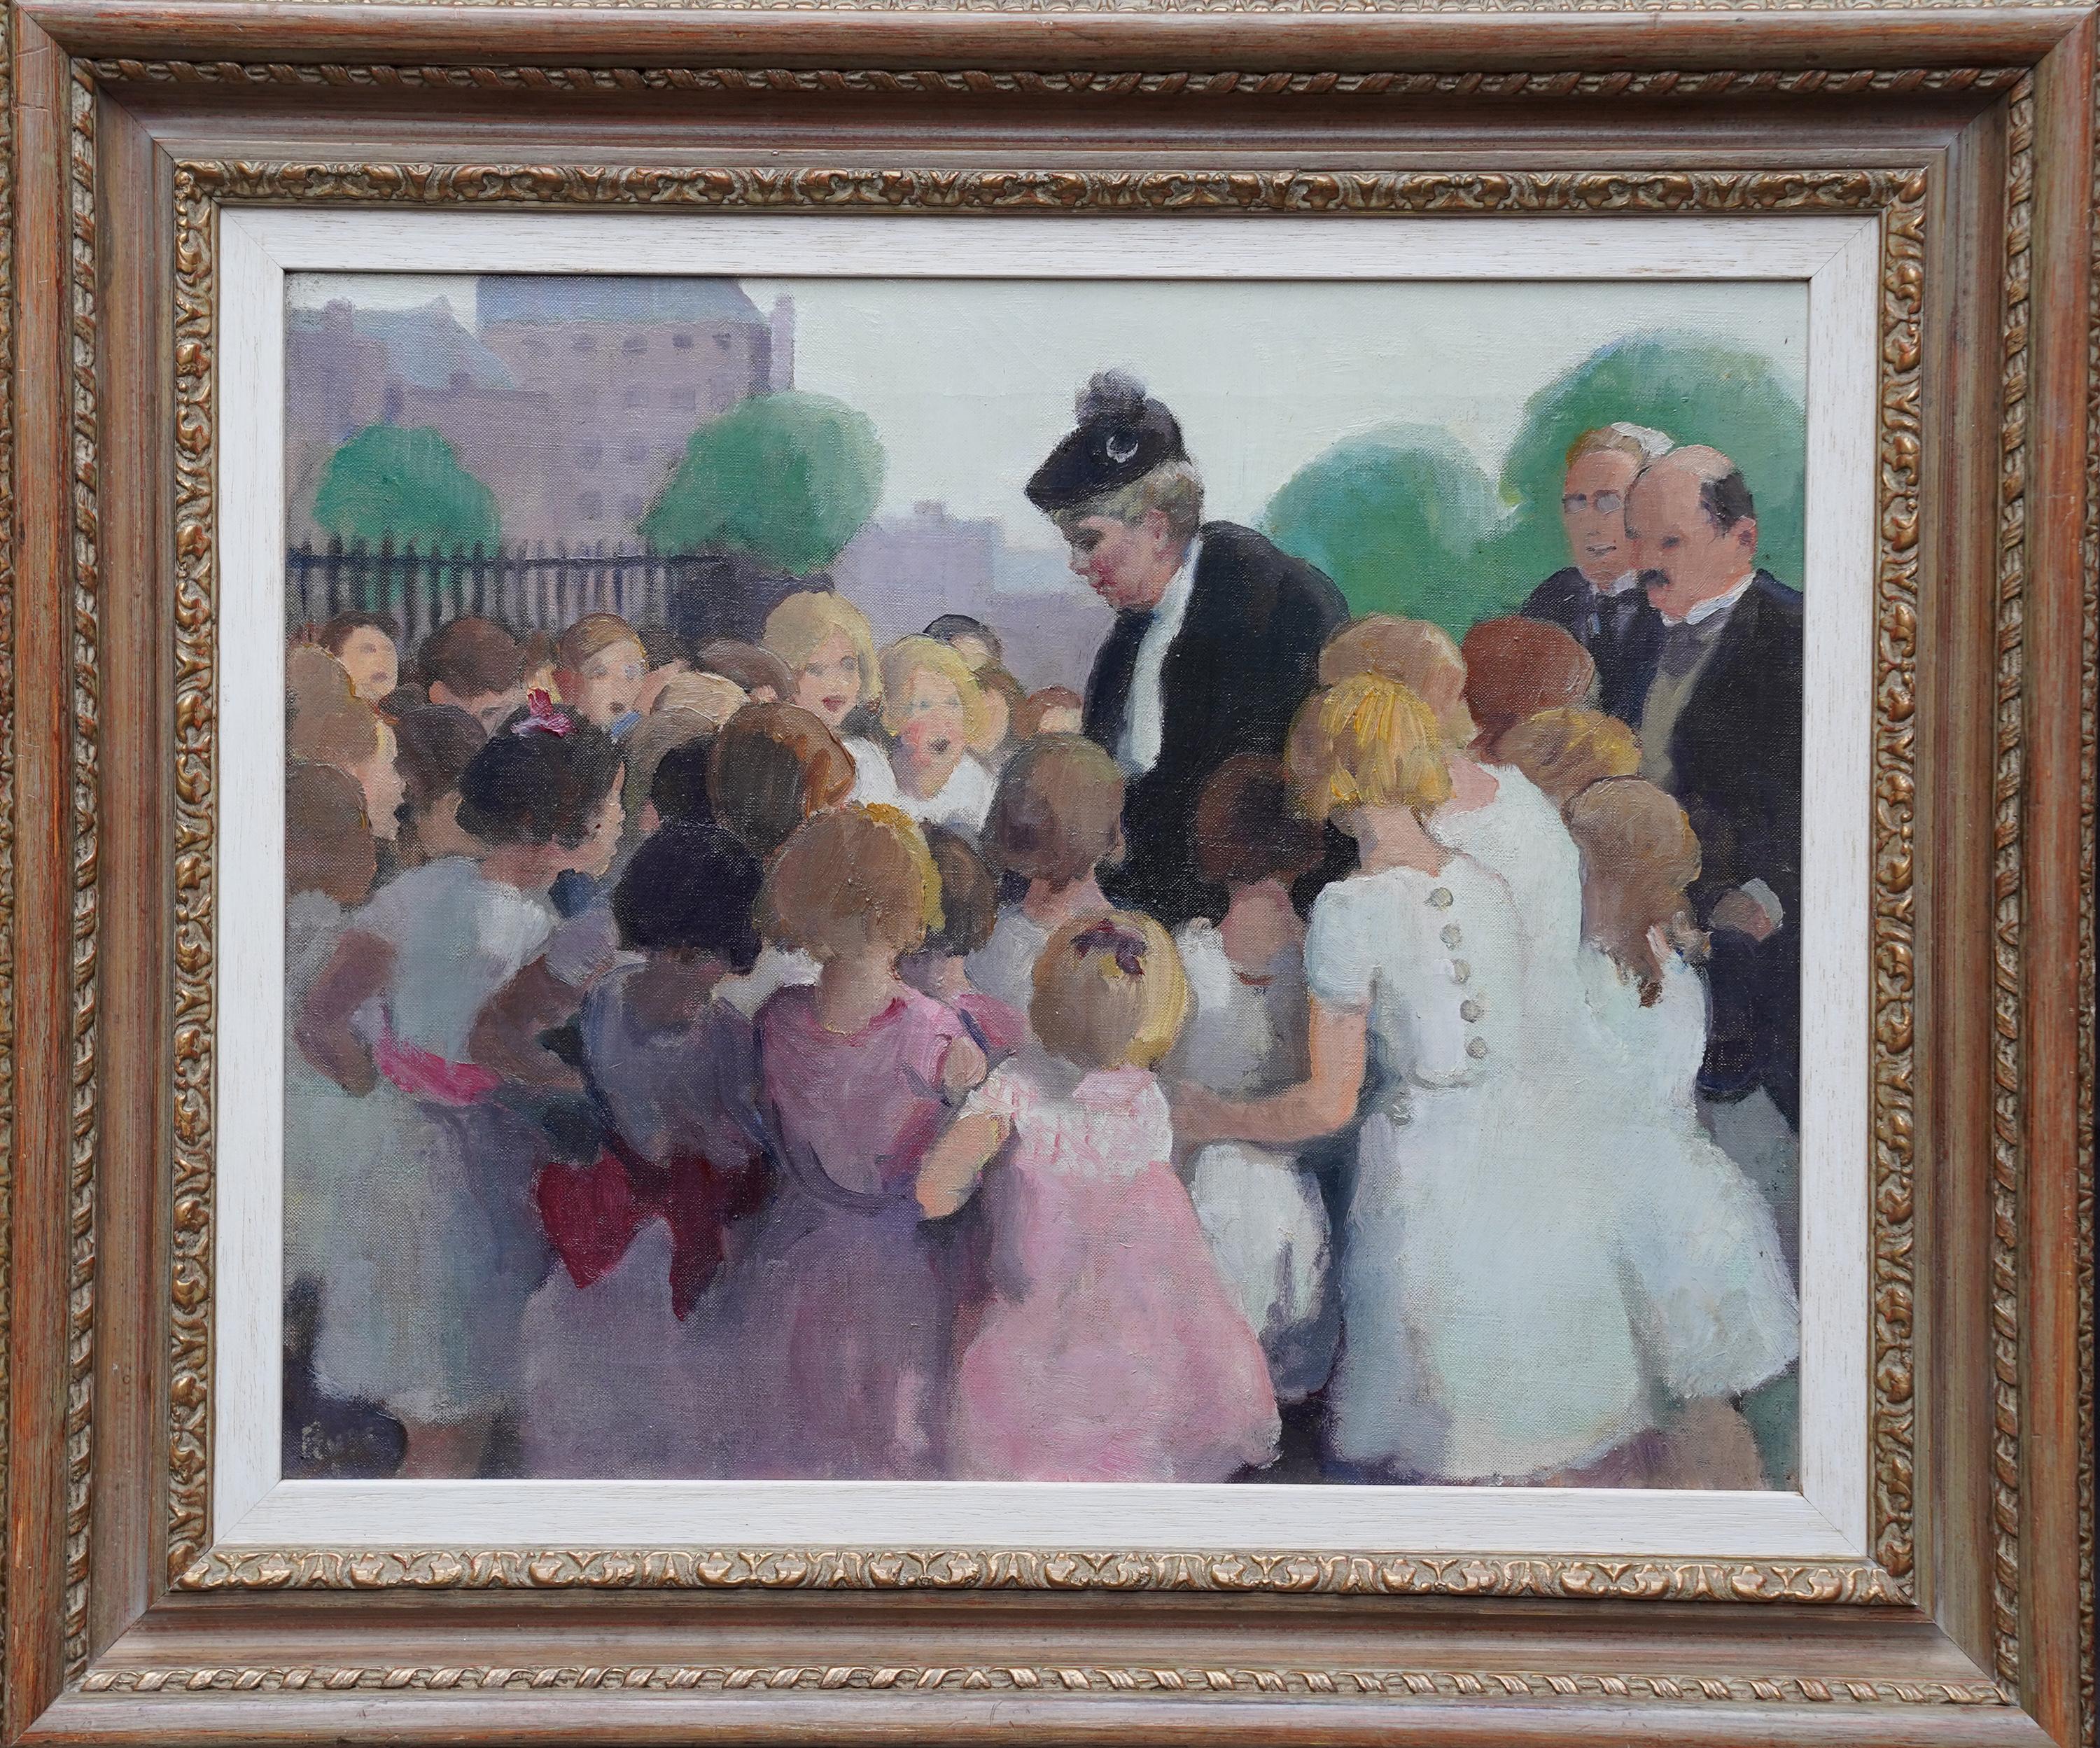 Spencer Pryse Portrait Painting - Queen Mary Greeting School Children - British 1910 royalty portrait oil painting